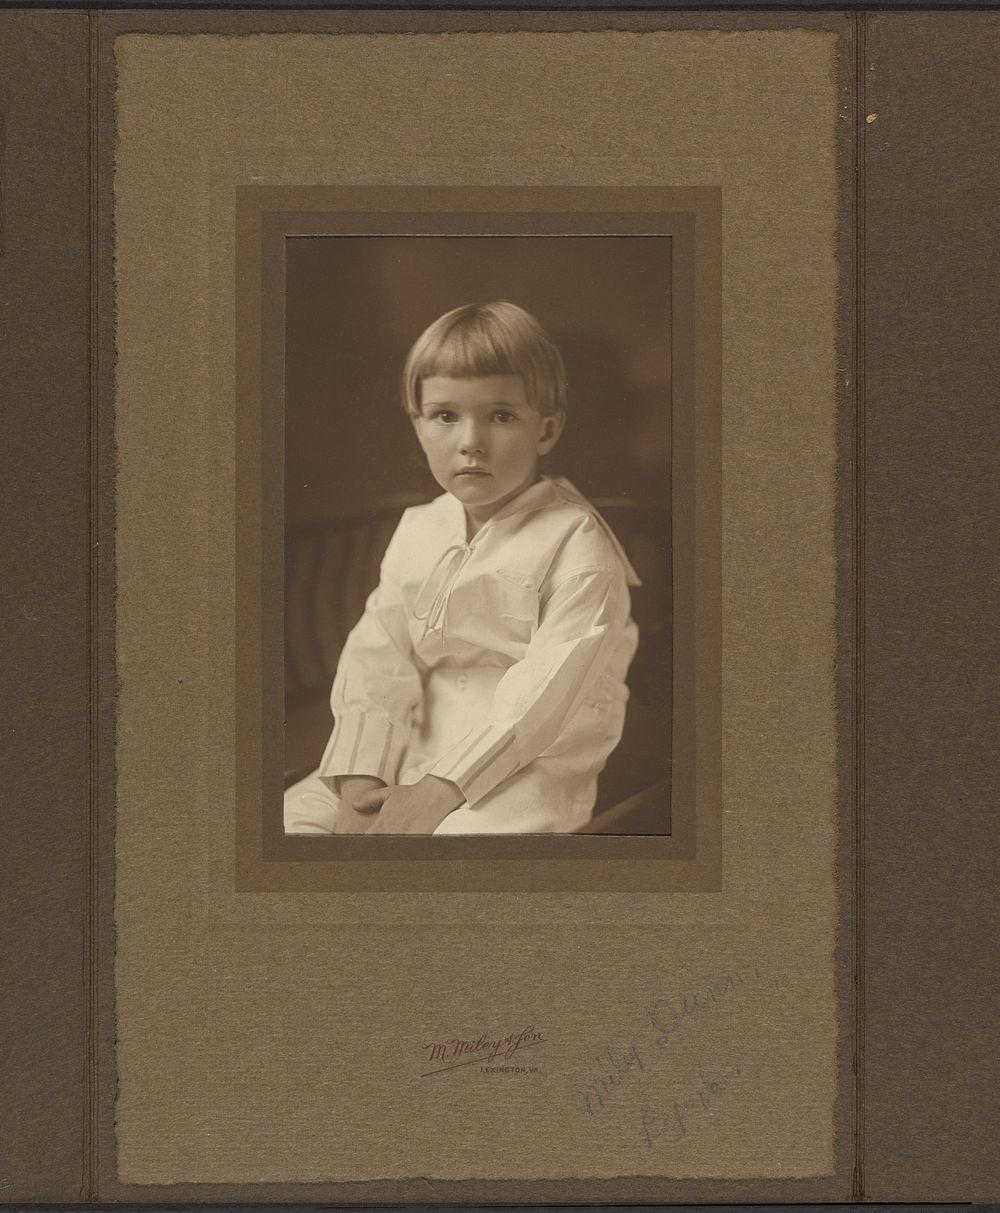 Portrait of a young boy by M Miley and Son